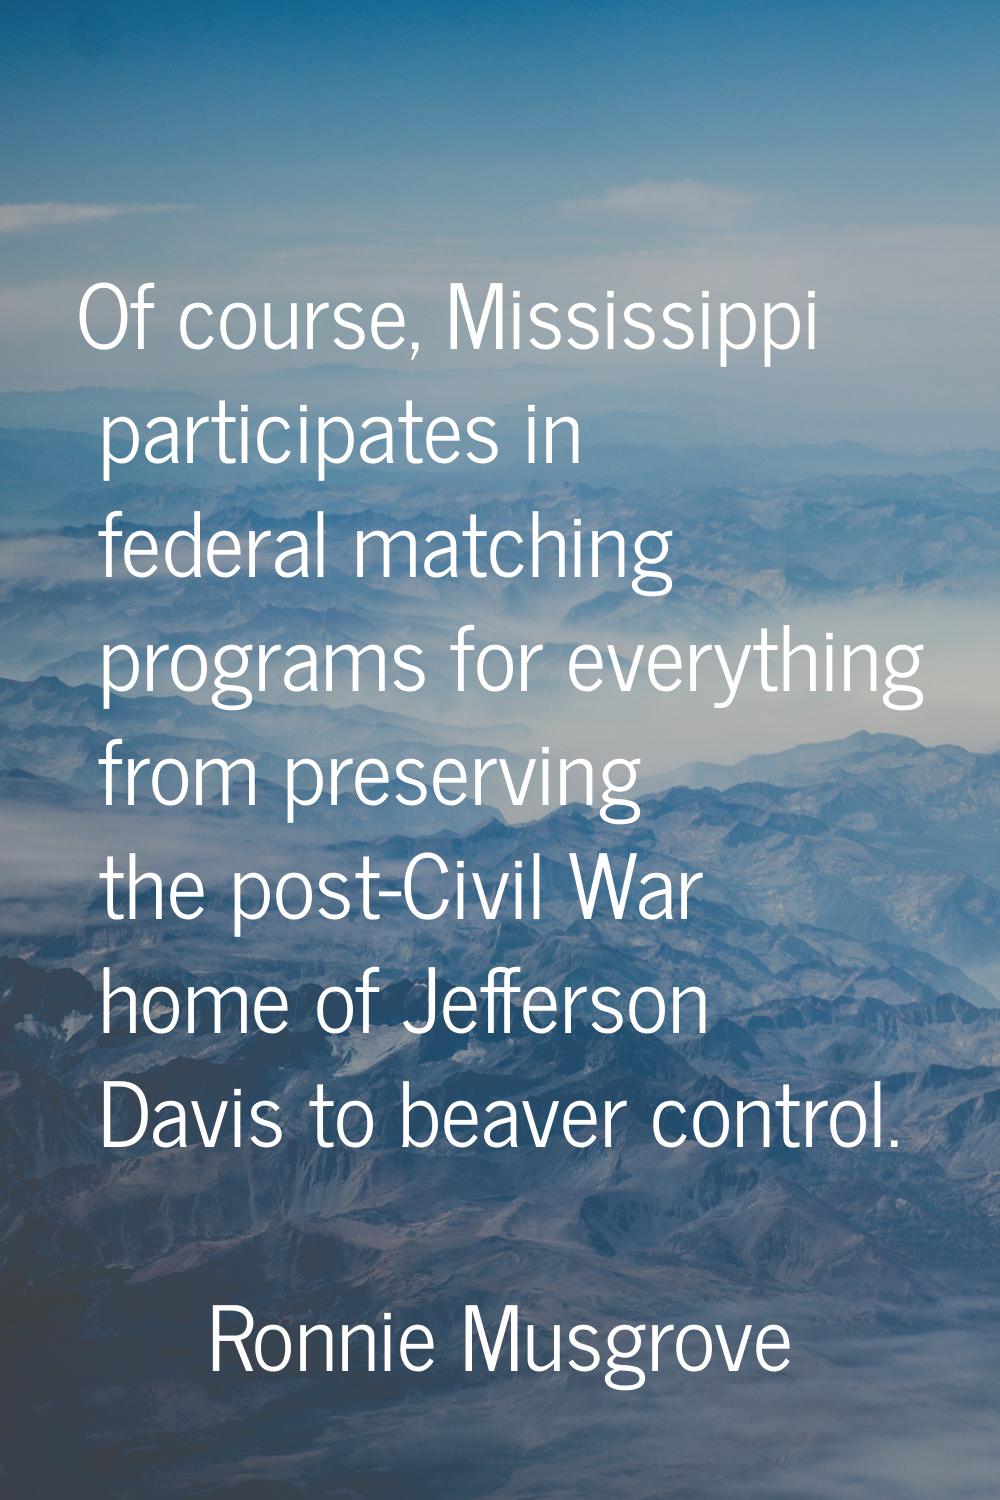 Of course, Mississippi participates in federal matching programs for everything from preserving the